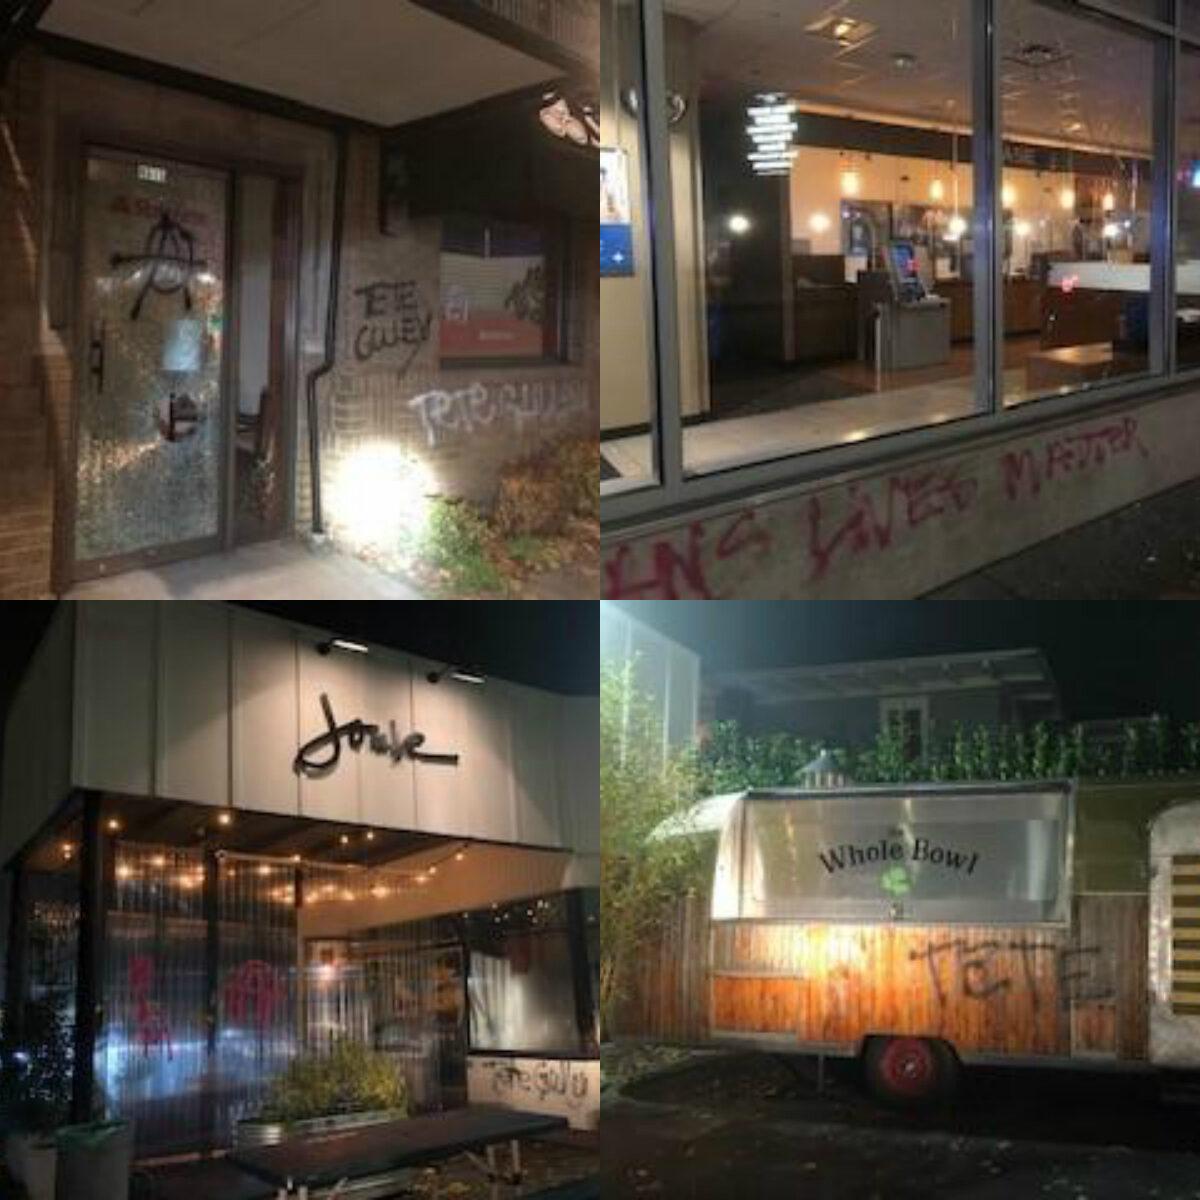 Damage to businesses inflicted by rioters in Portland, Ore., on Nov. 20, 2020. (Portland Police Bureau)